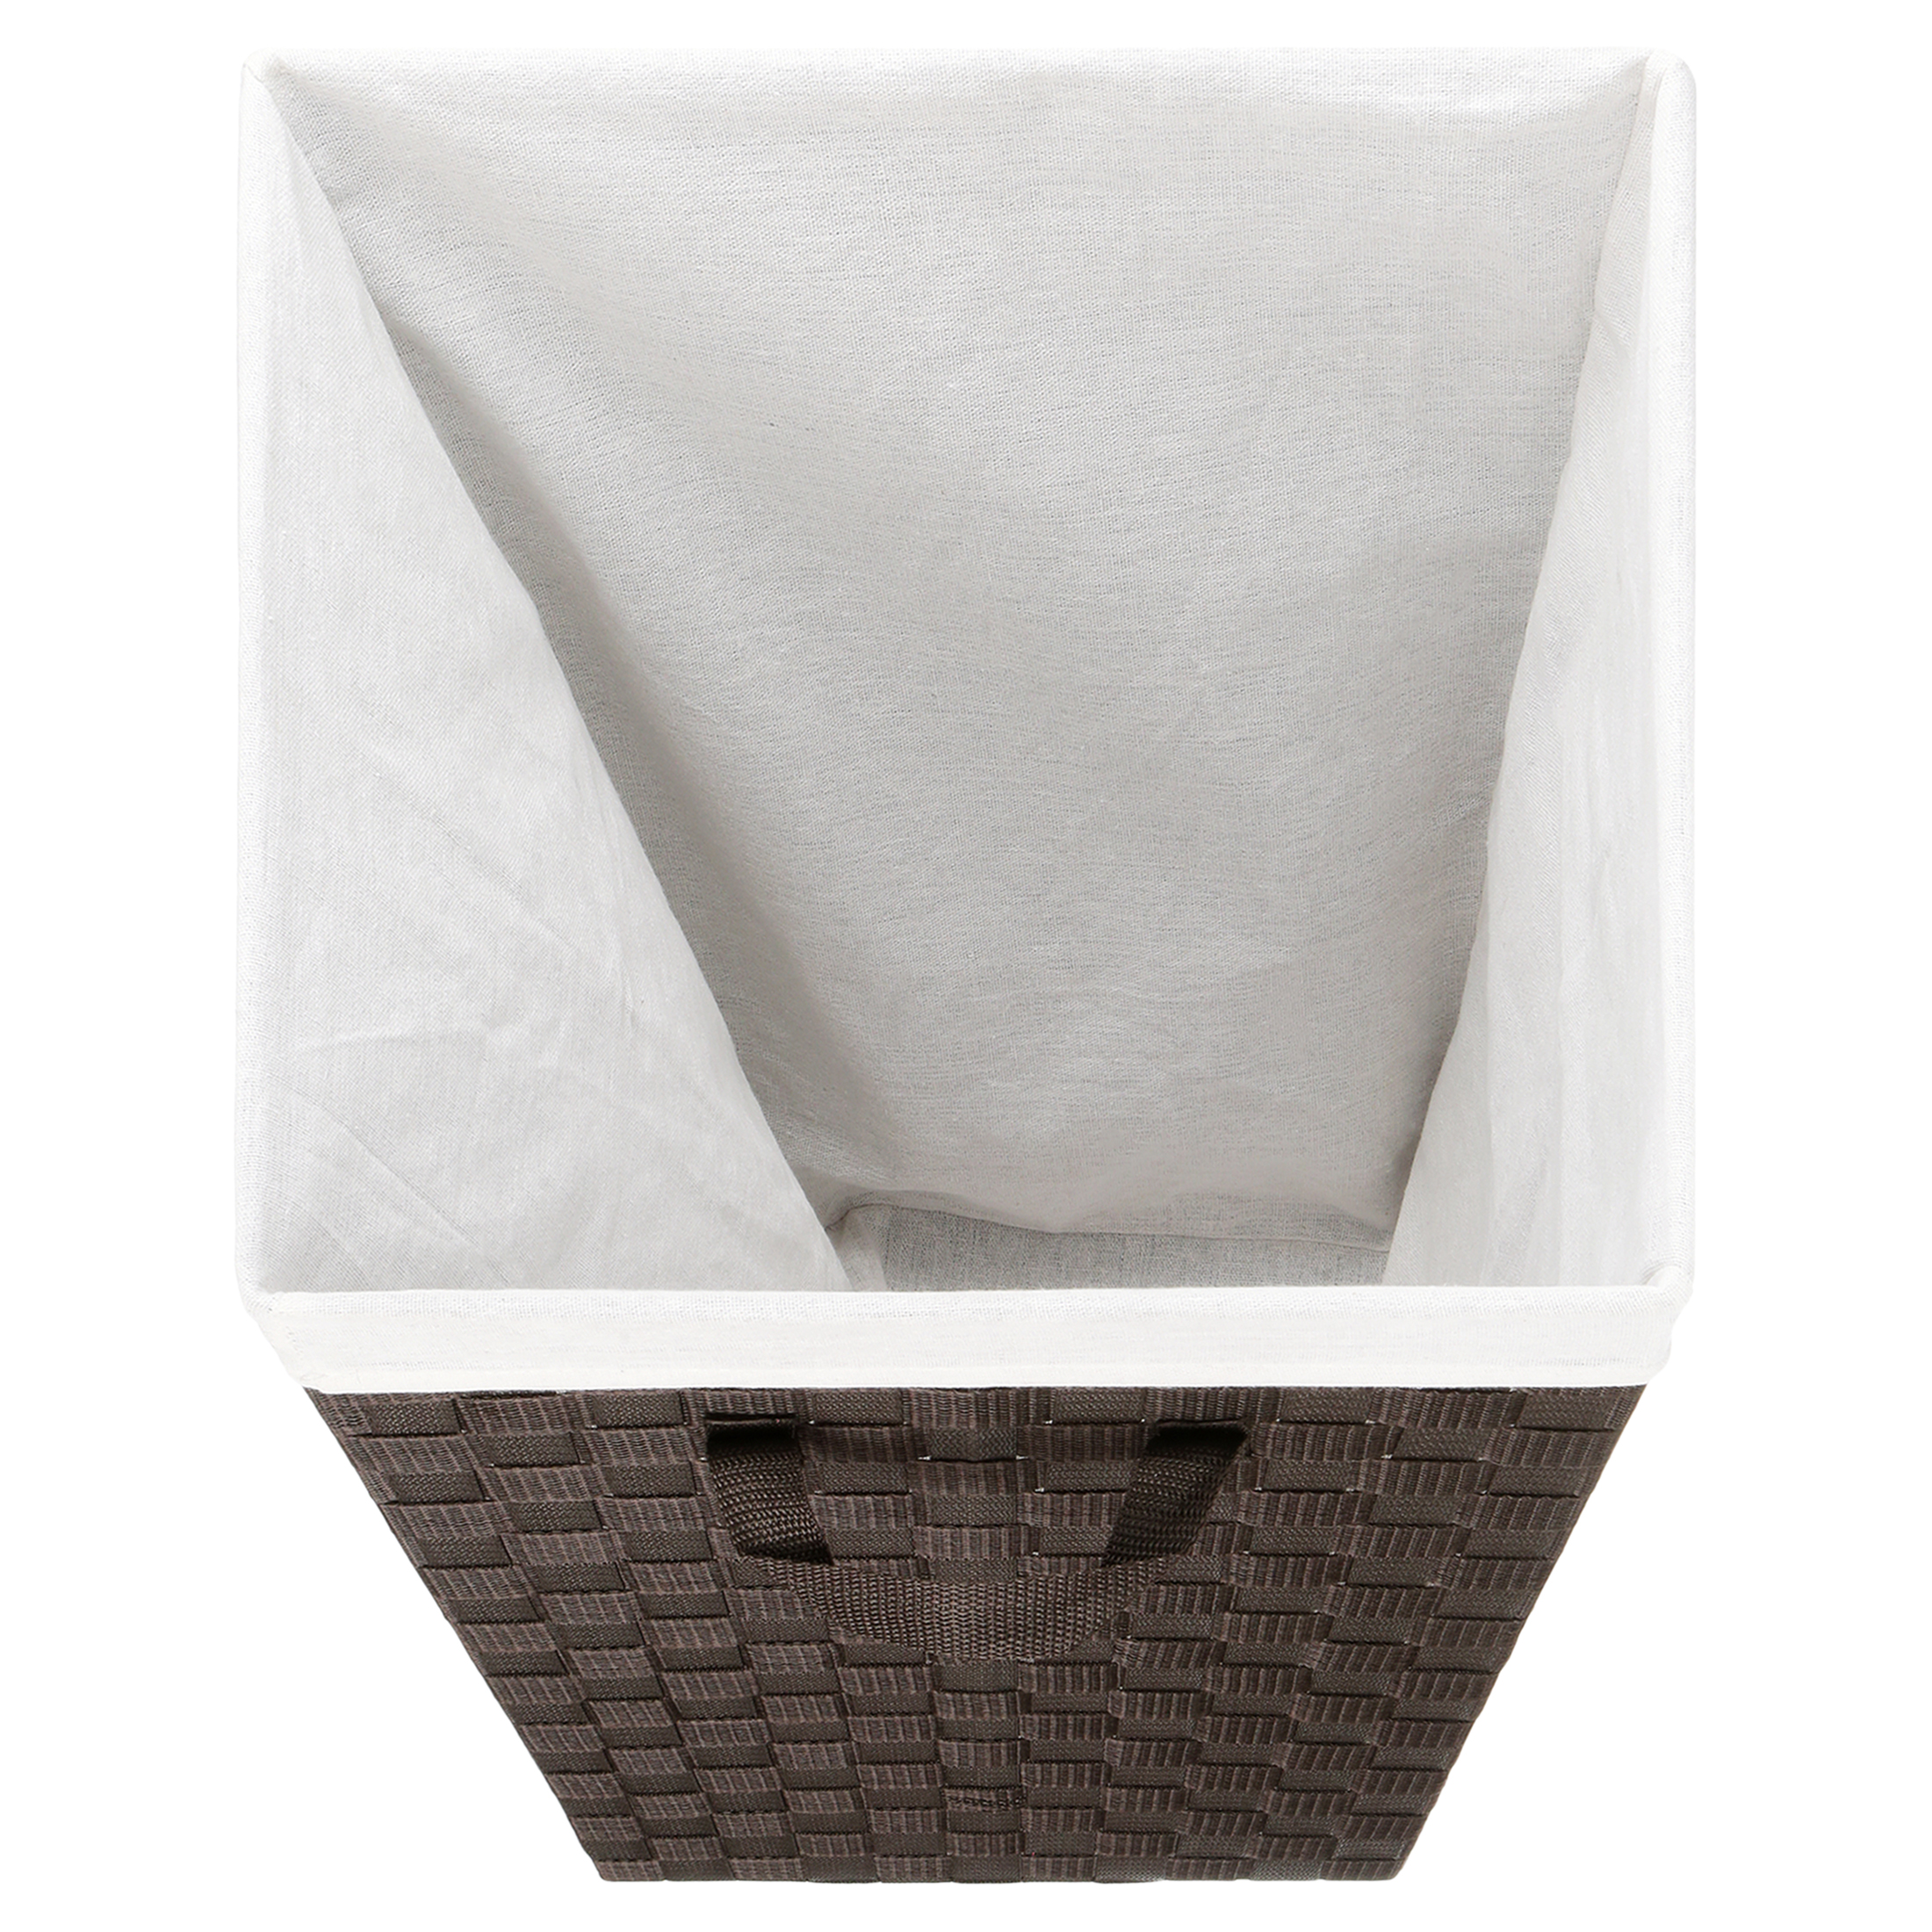 Whitmor Woven Strap Laundry Hamper with Fabric Liner, Espresso - image 8 of 8